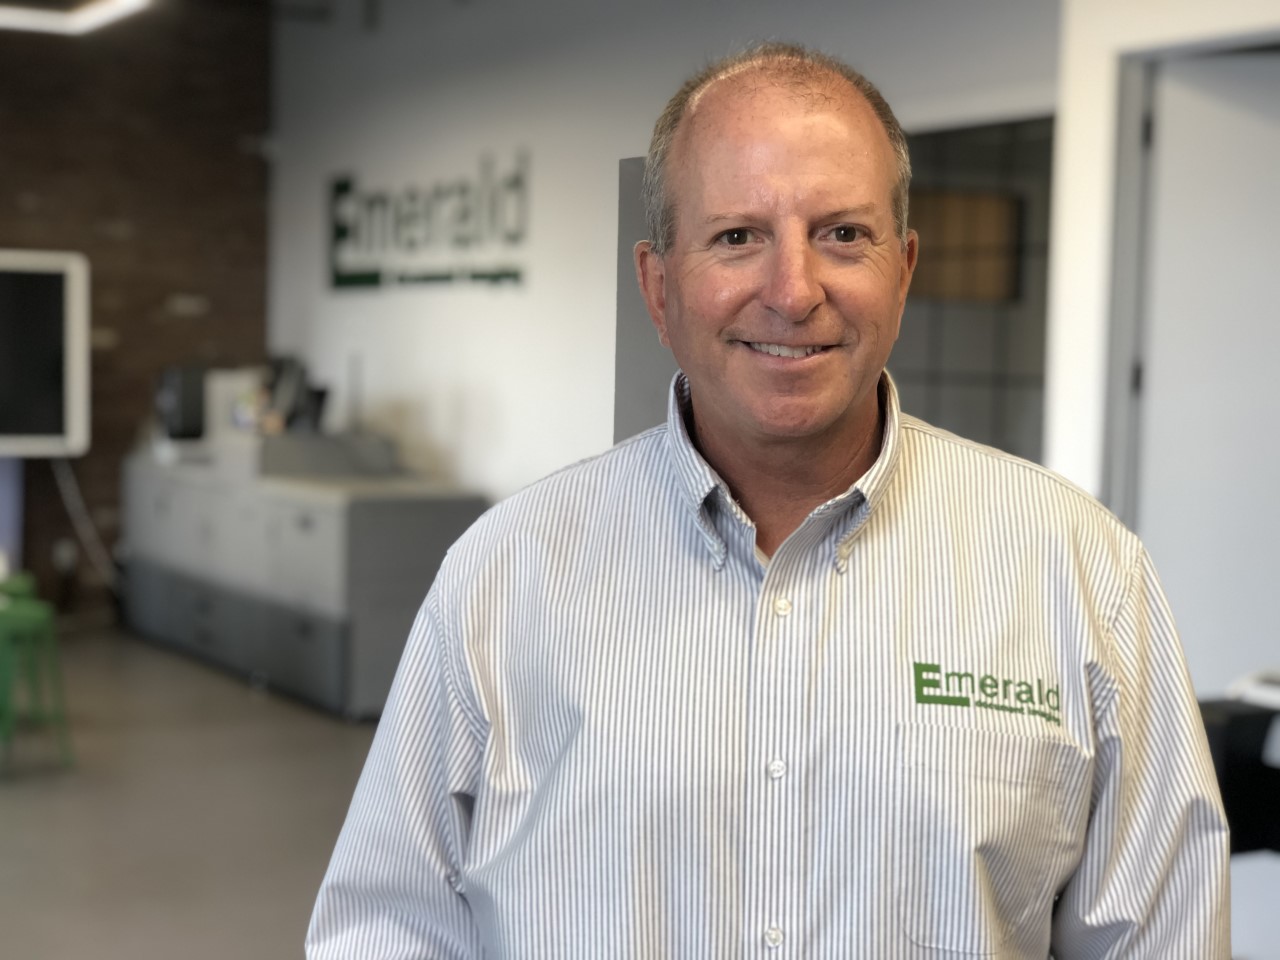 Emerald Document Imaging Appoints Keith Elgort VP/General Manager